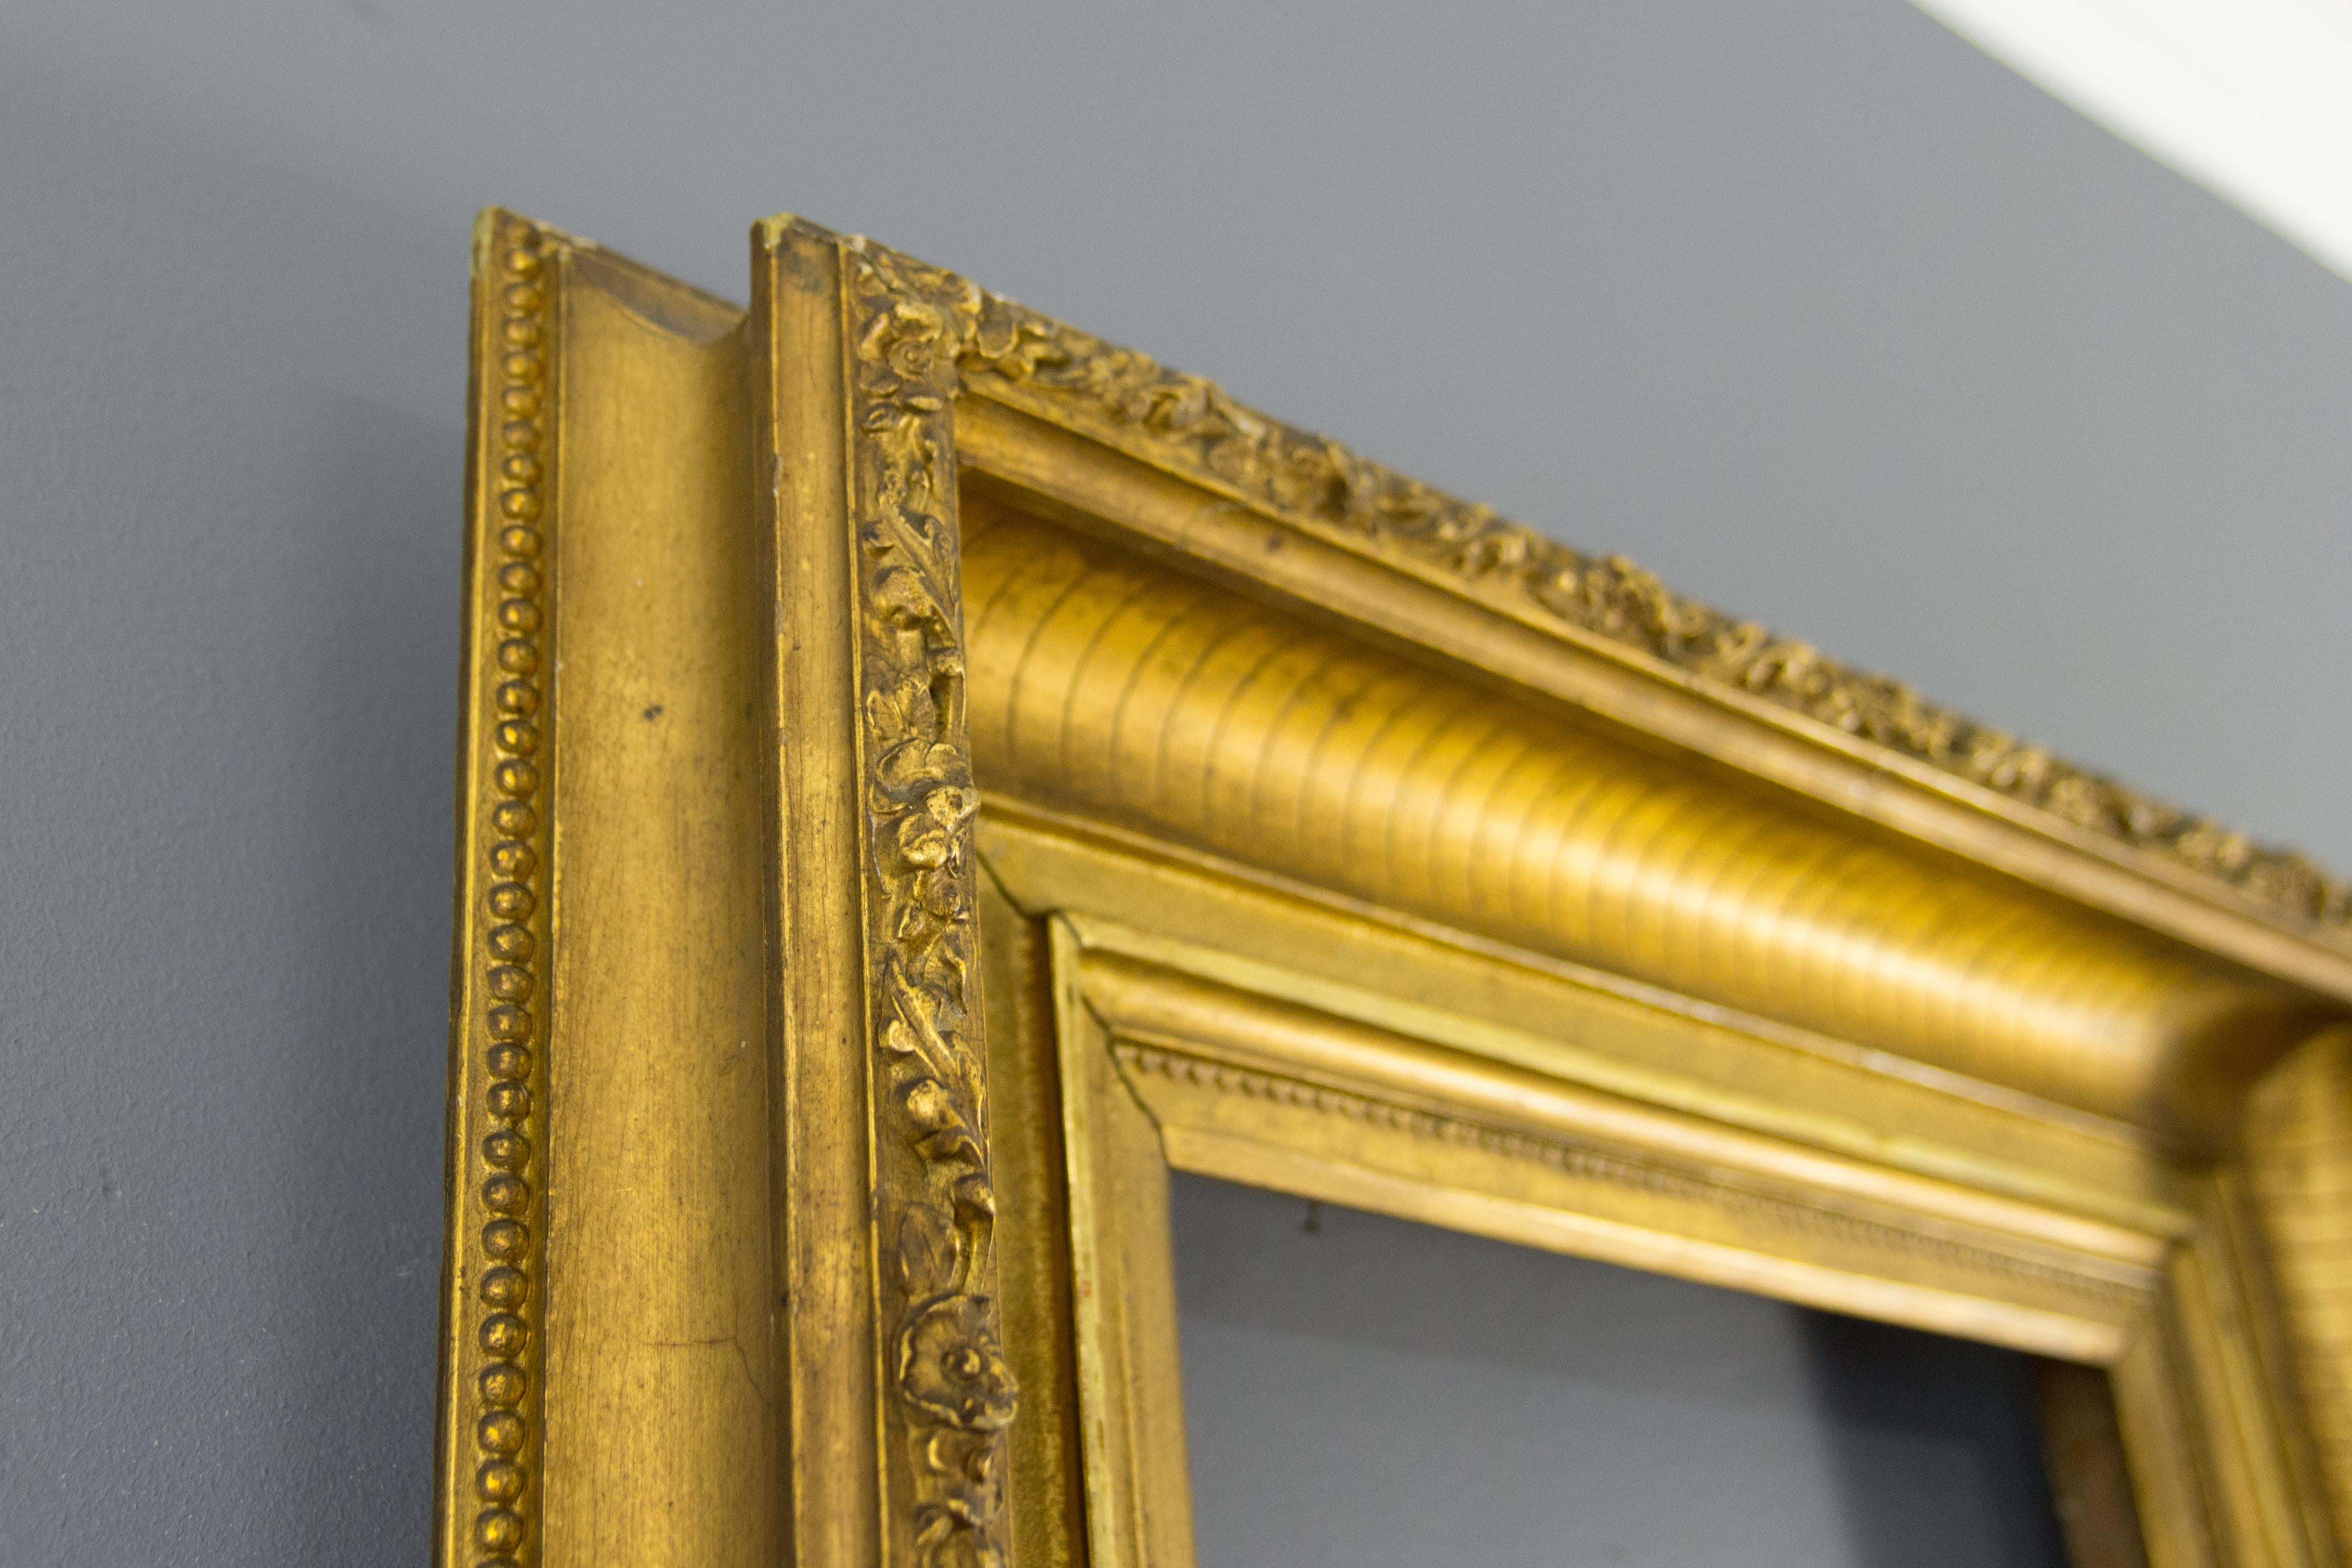 Beautiful French giltwood and gesso picture frame or mirror frame, late 19th century.
This spectacular antique frame features a fluted border, decorated with flowers and leaves on the outer edge.
Dimensions: Height 54.5 cm / 21.46 in, width 50.5 cm